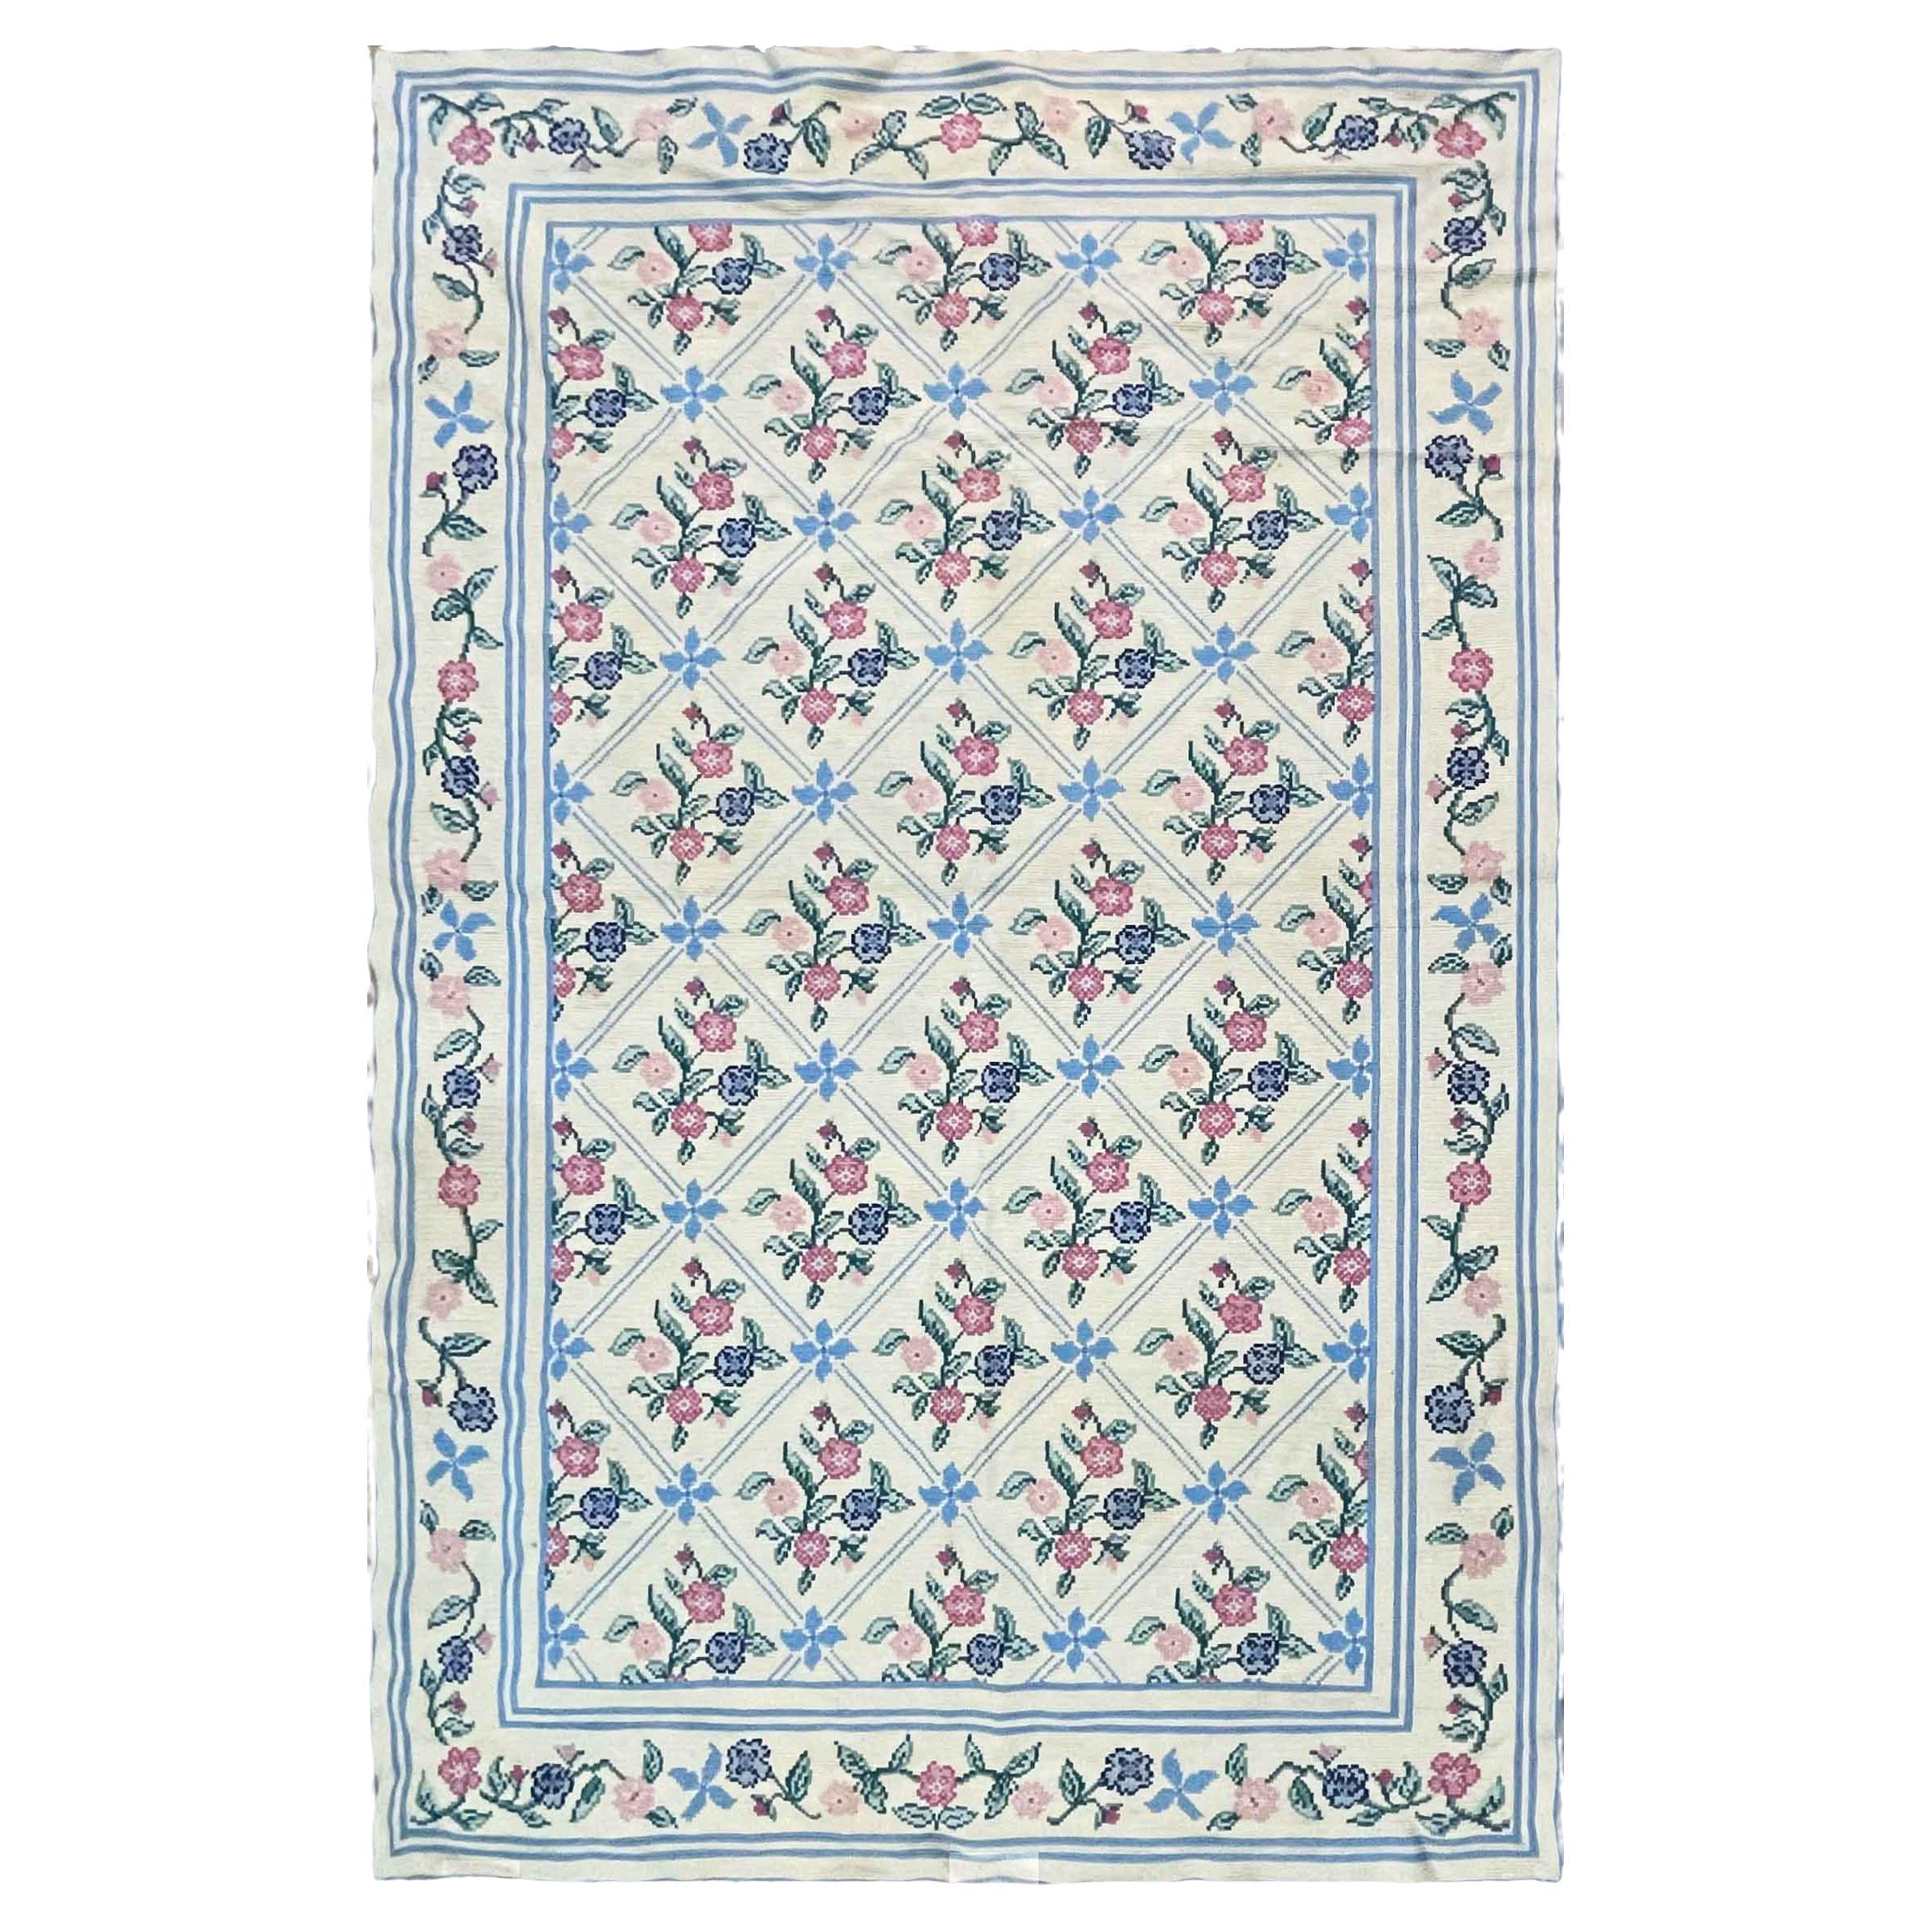 Vintage European needle point rug, AS IS For Sale